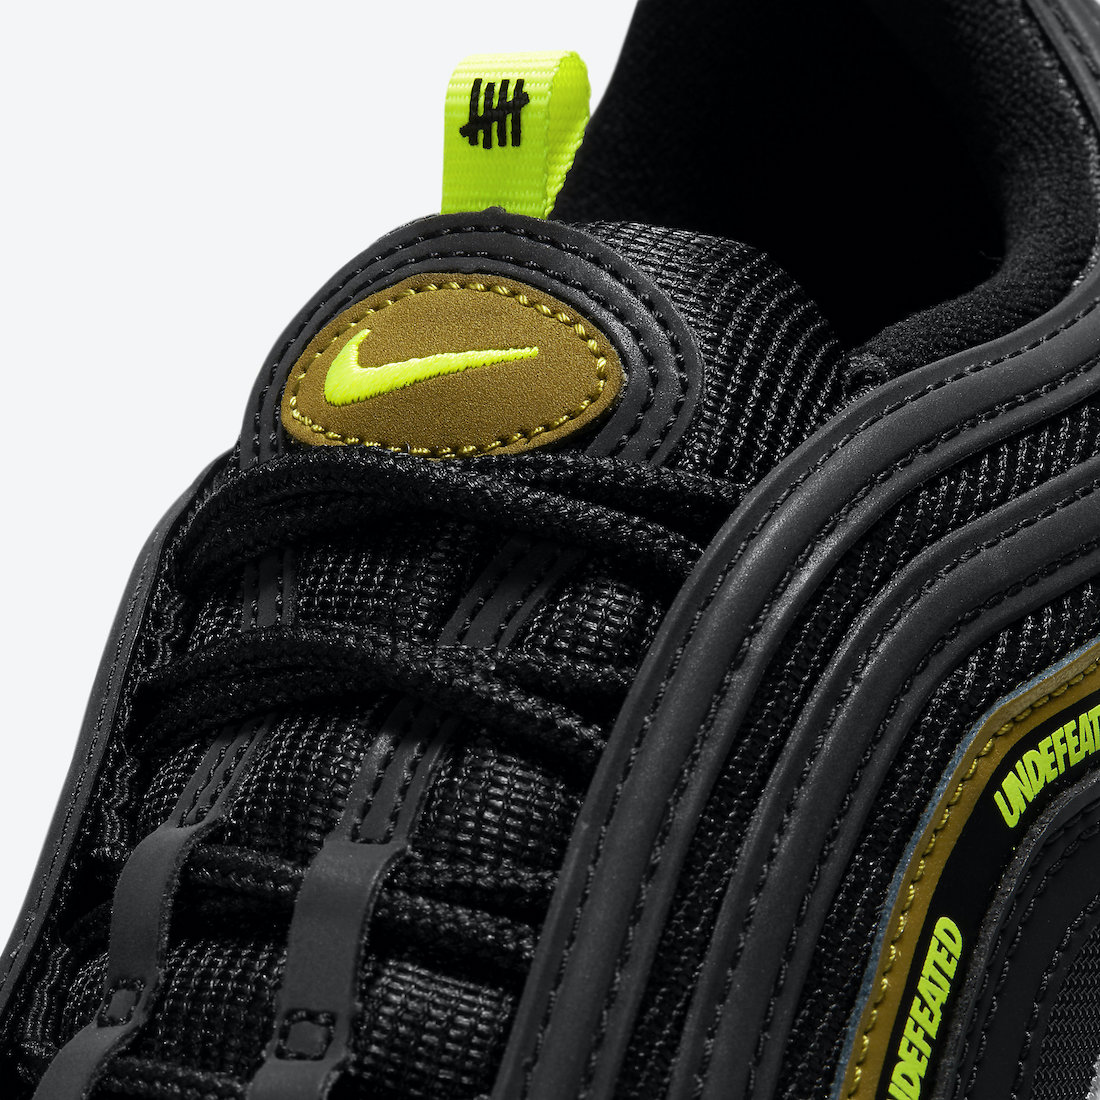 Undefeated Nike Air Max 97 Black Volt DC4830-001 Release Date